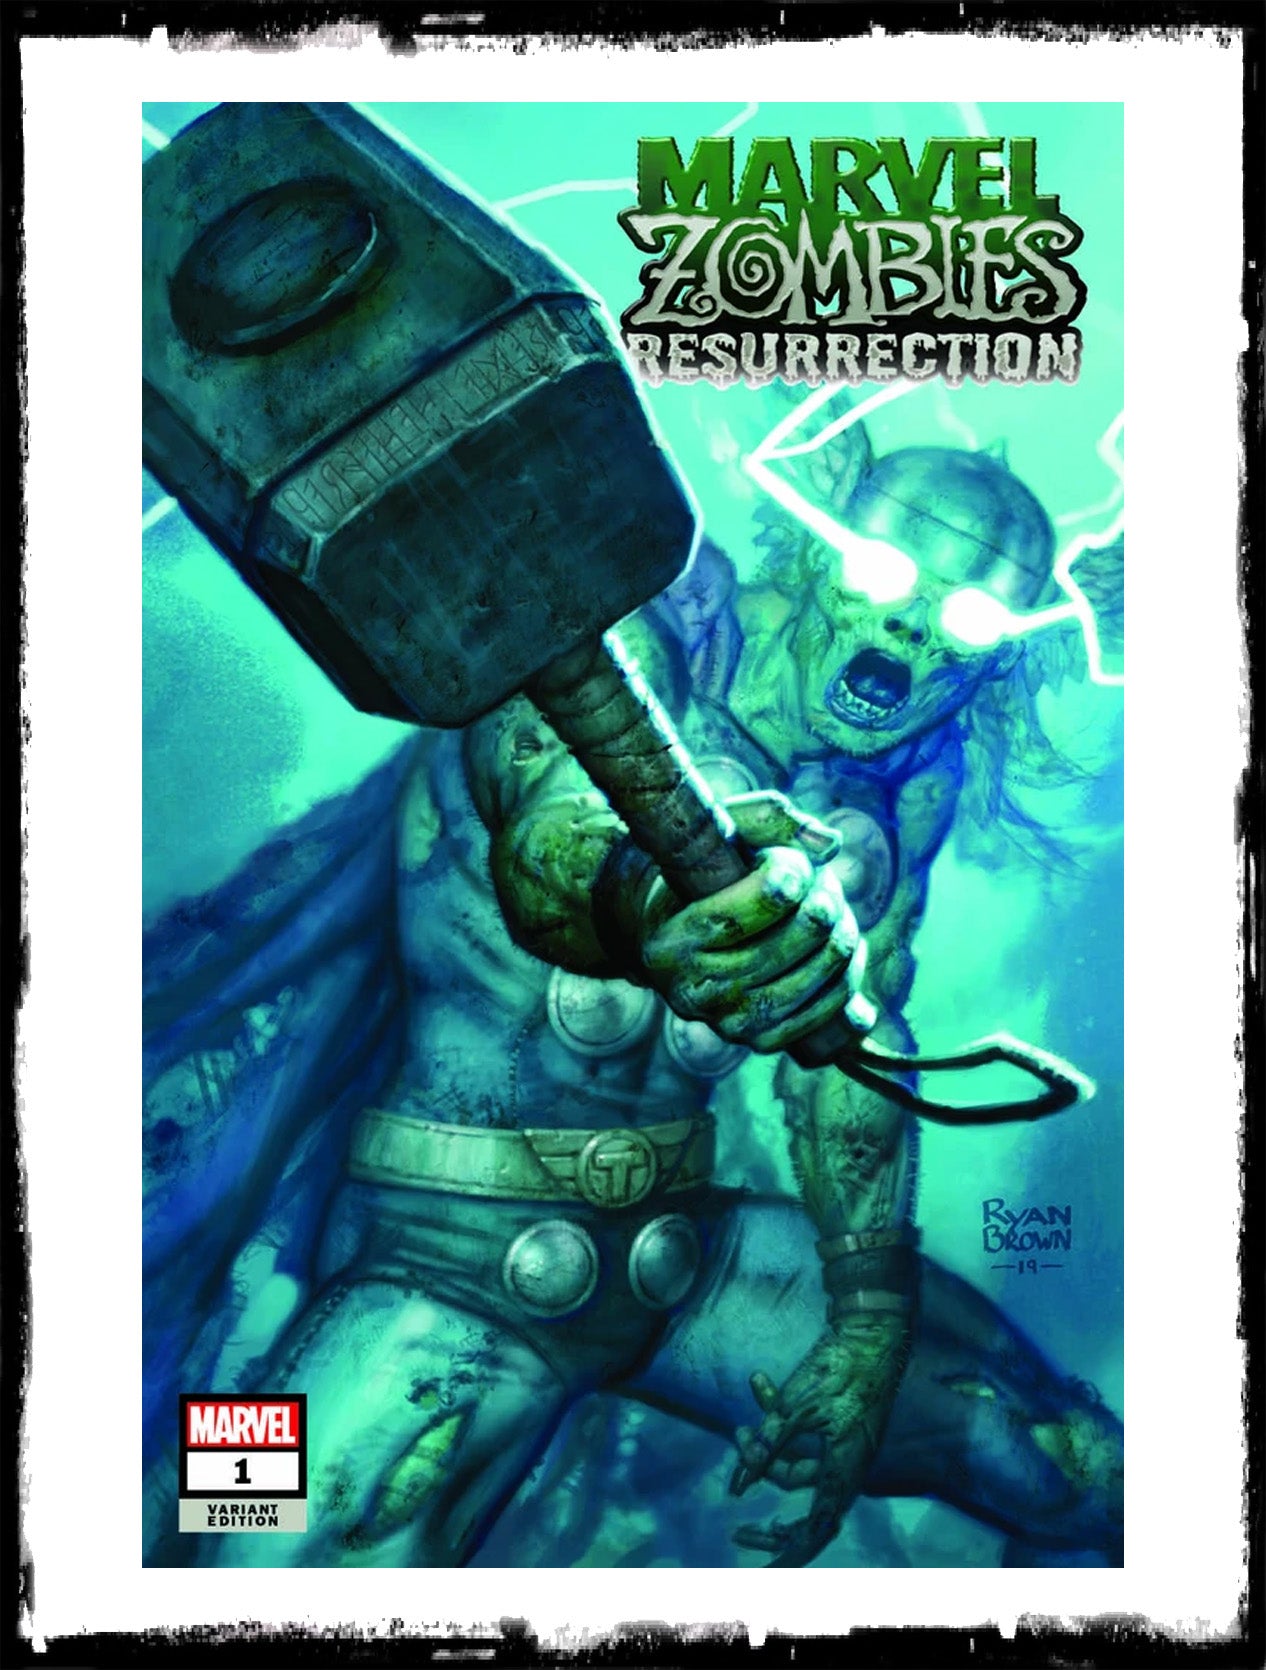 MARVEL ZOMBIES: RESURRECTION - #1 RYAN BROWN VARIANT EXCLUSIVE (2019 - VF+/NM-)